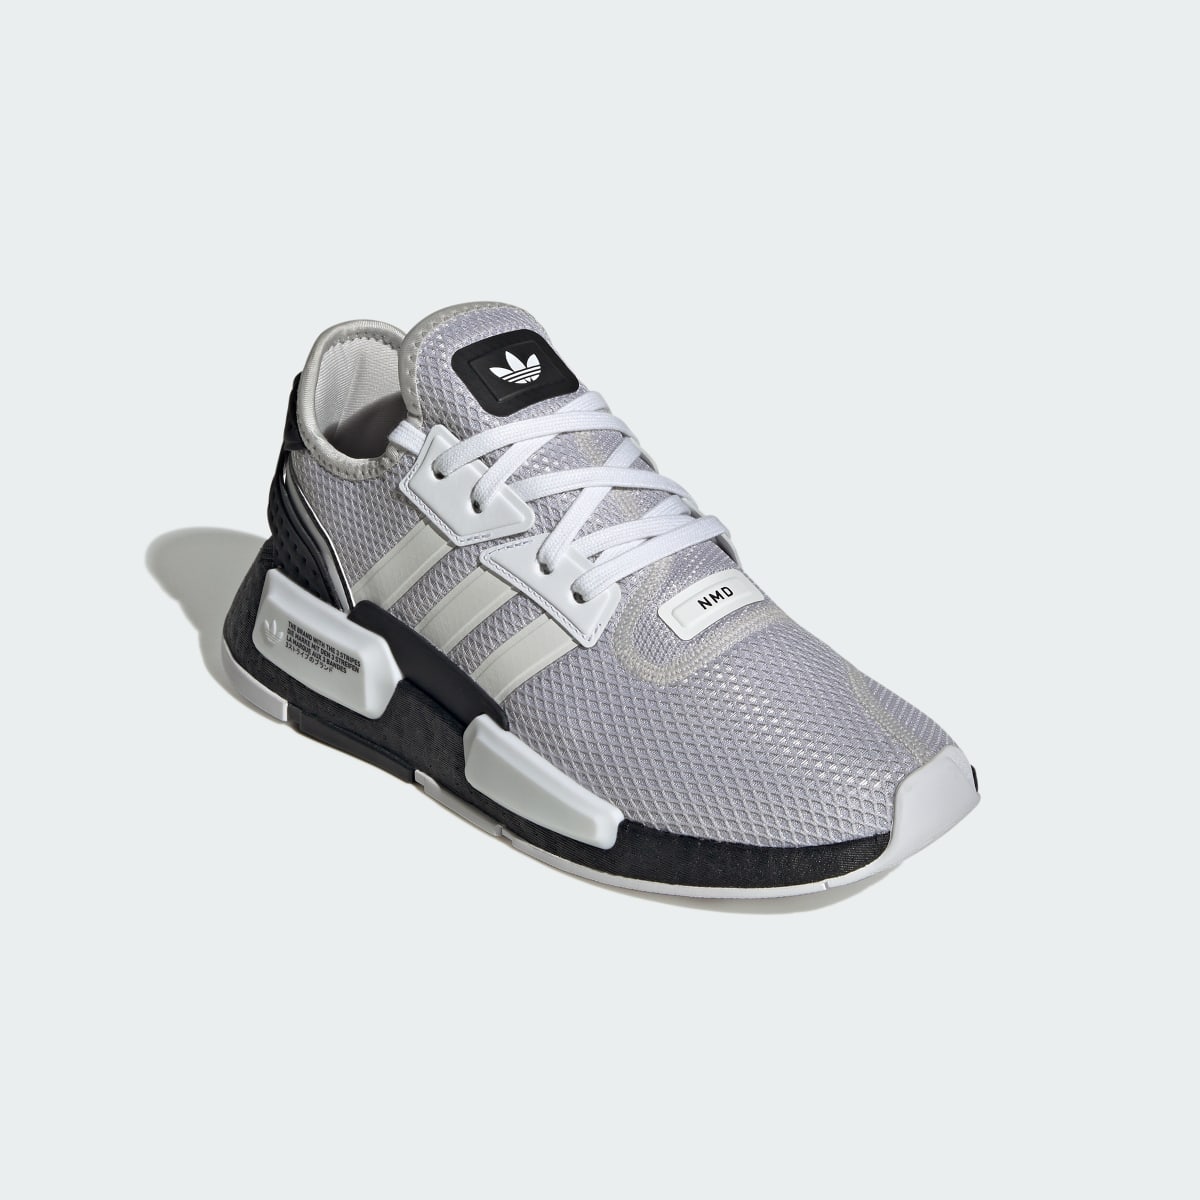 Adidas NMD_G1 Shoes. 8